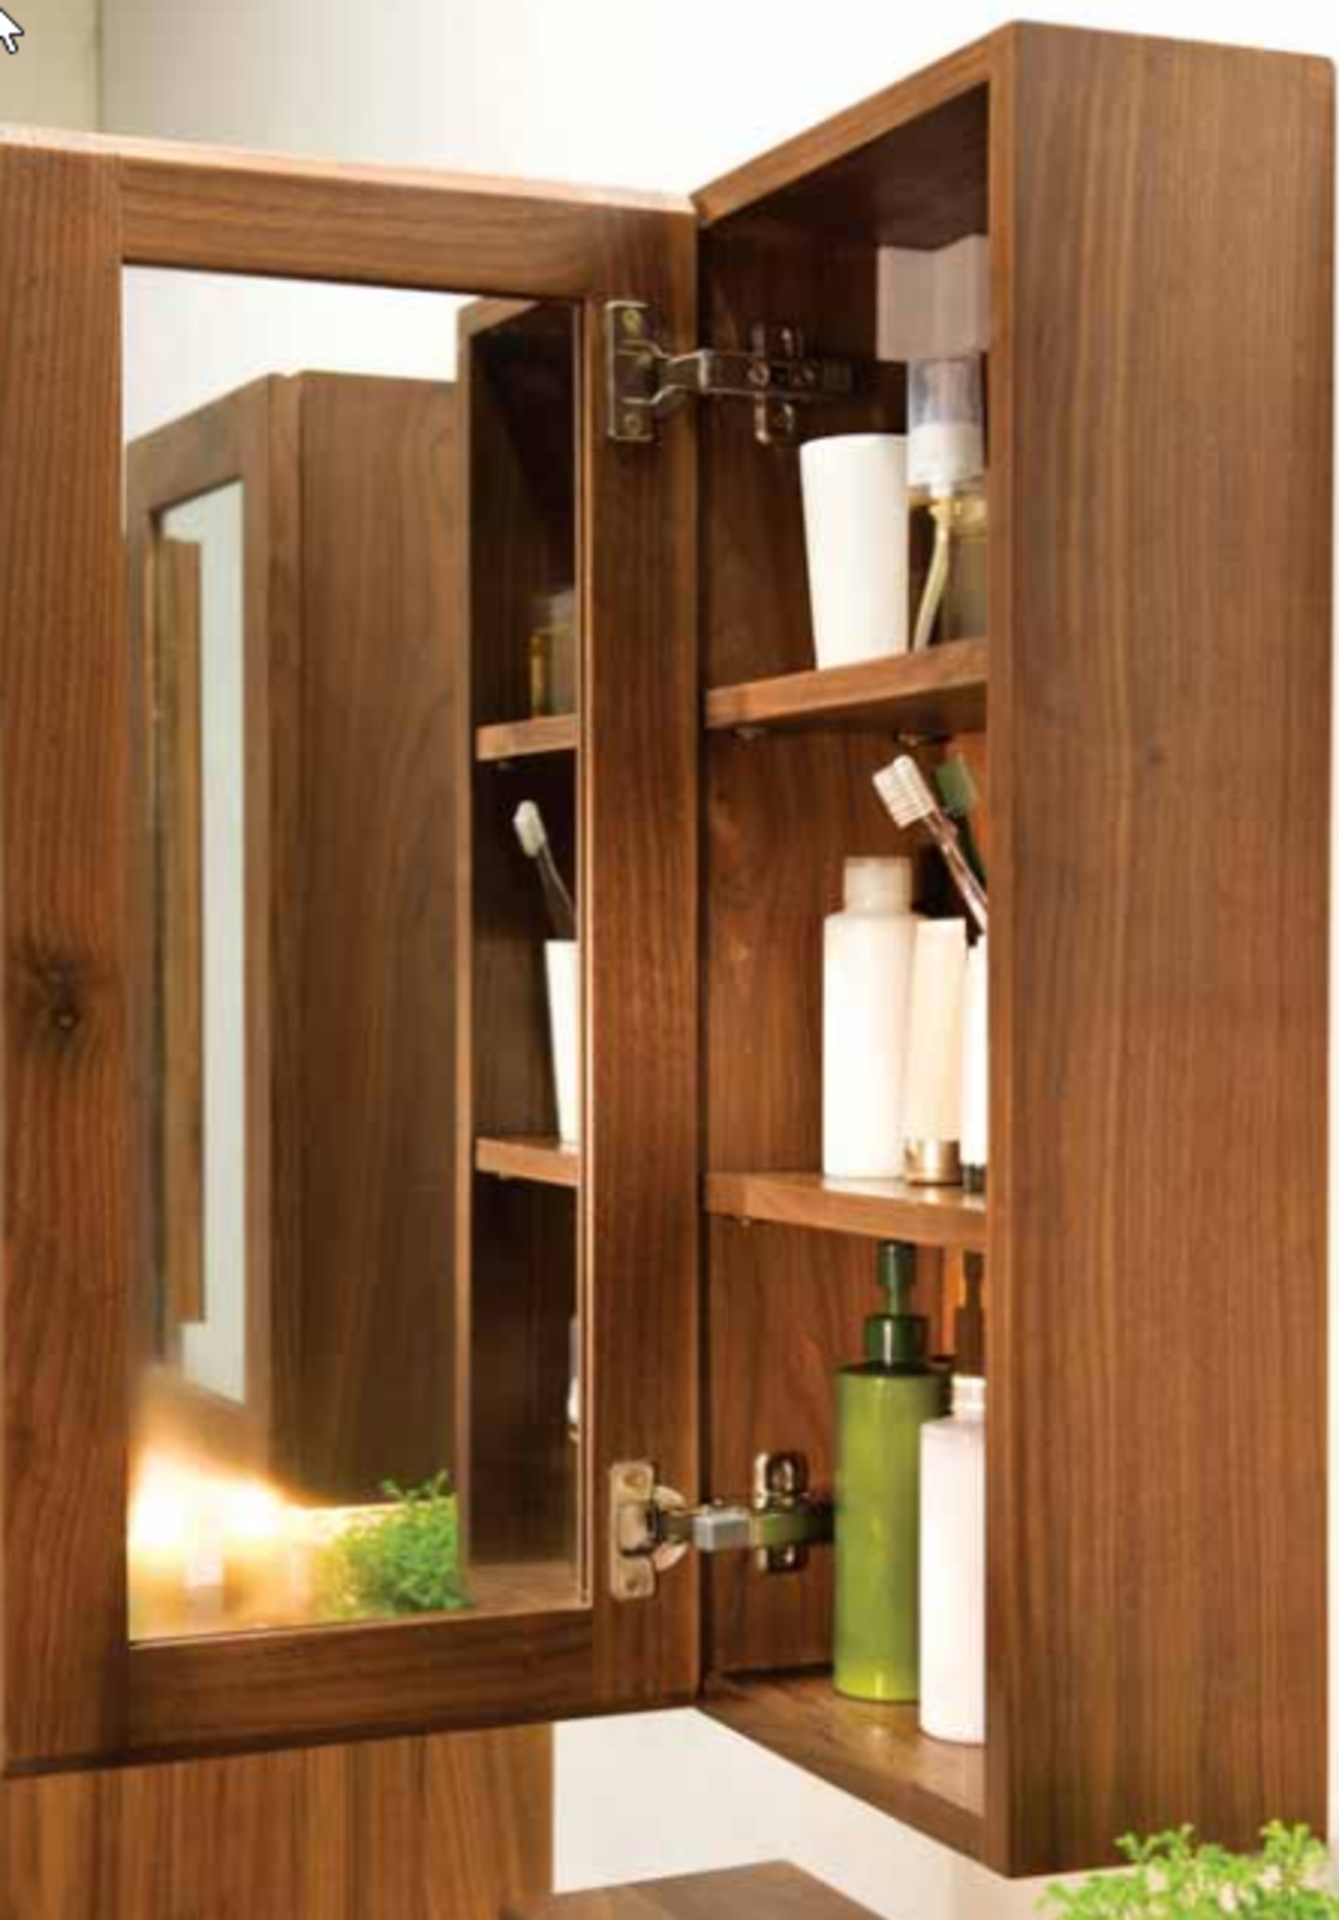 1 x Stonearth 300mm Wall Mounted Mirrored Bathroom Storage Cabinet - American Solid Walnut RRP £356 - Image 3 of 10